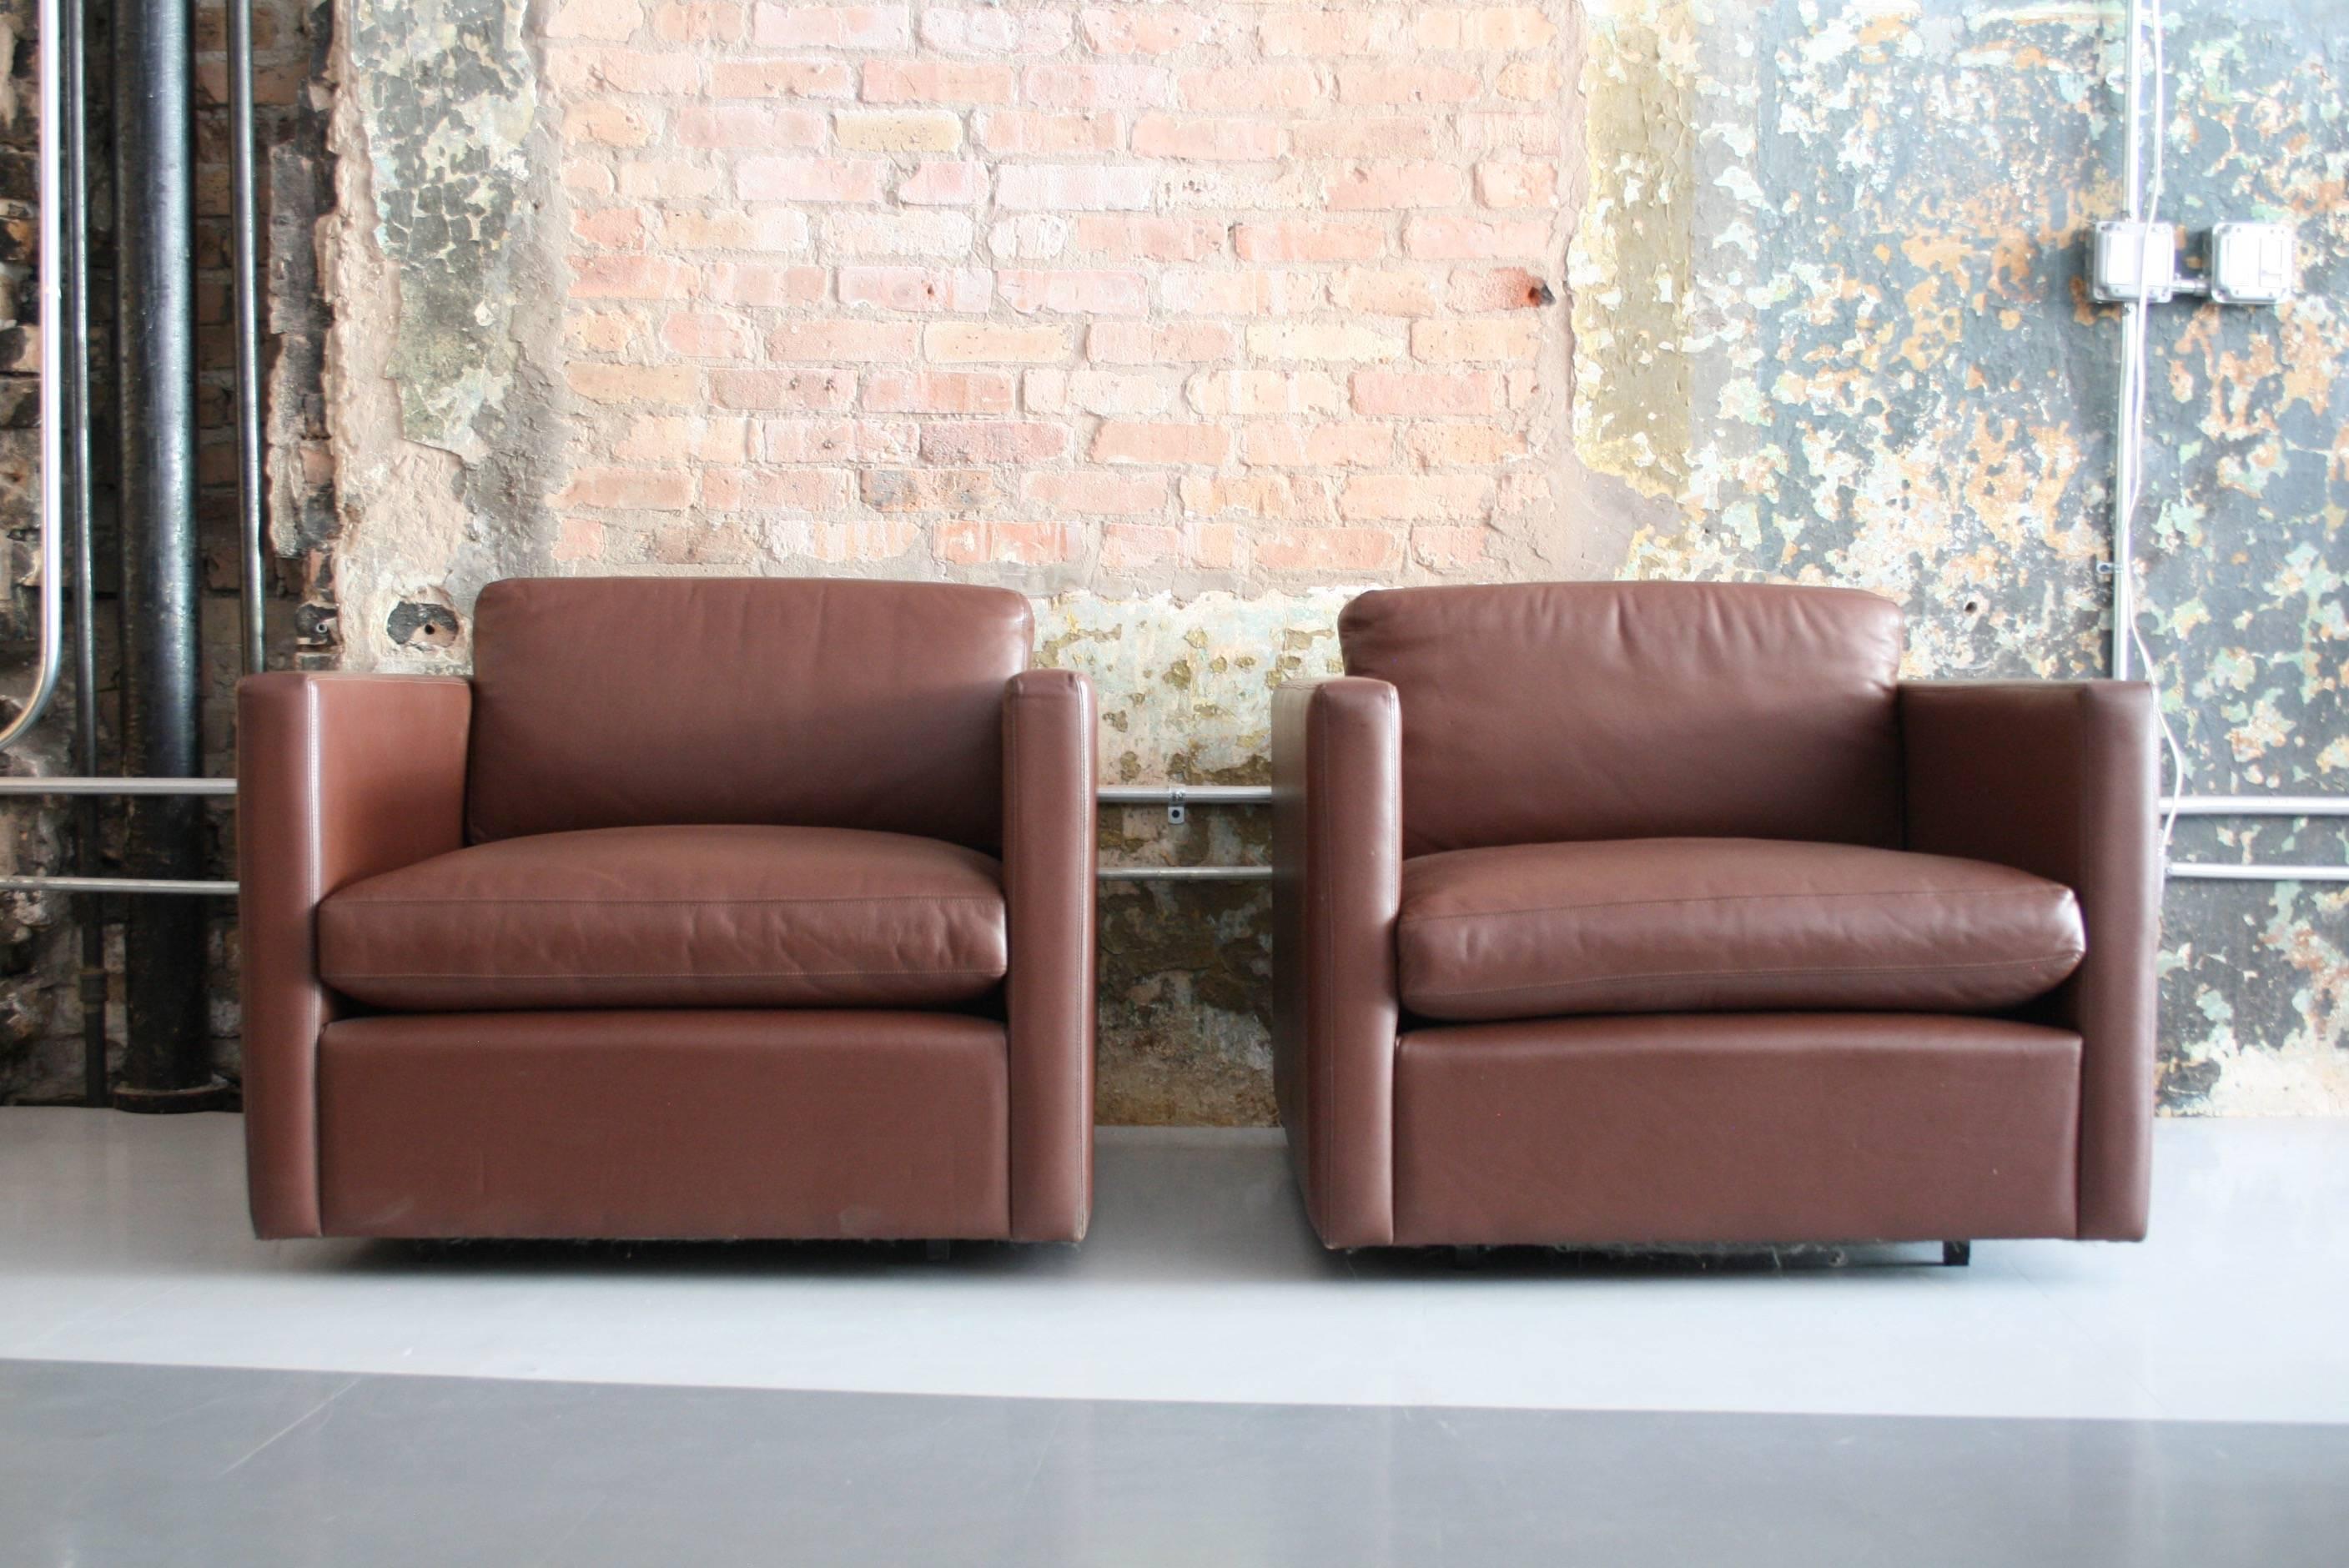 Late 20th Century Pair of Leather Lounge Chairs by Charles Pfister for Knoll